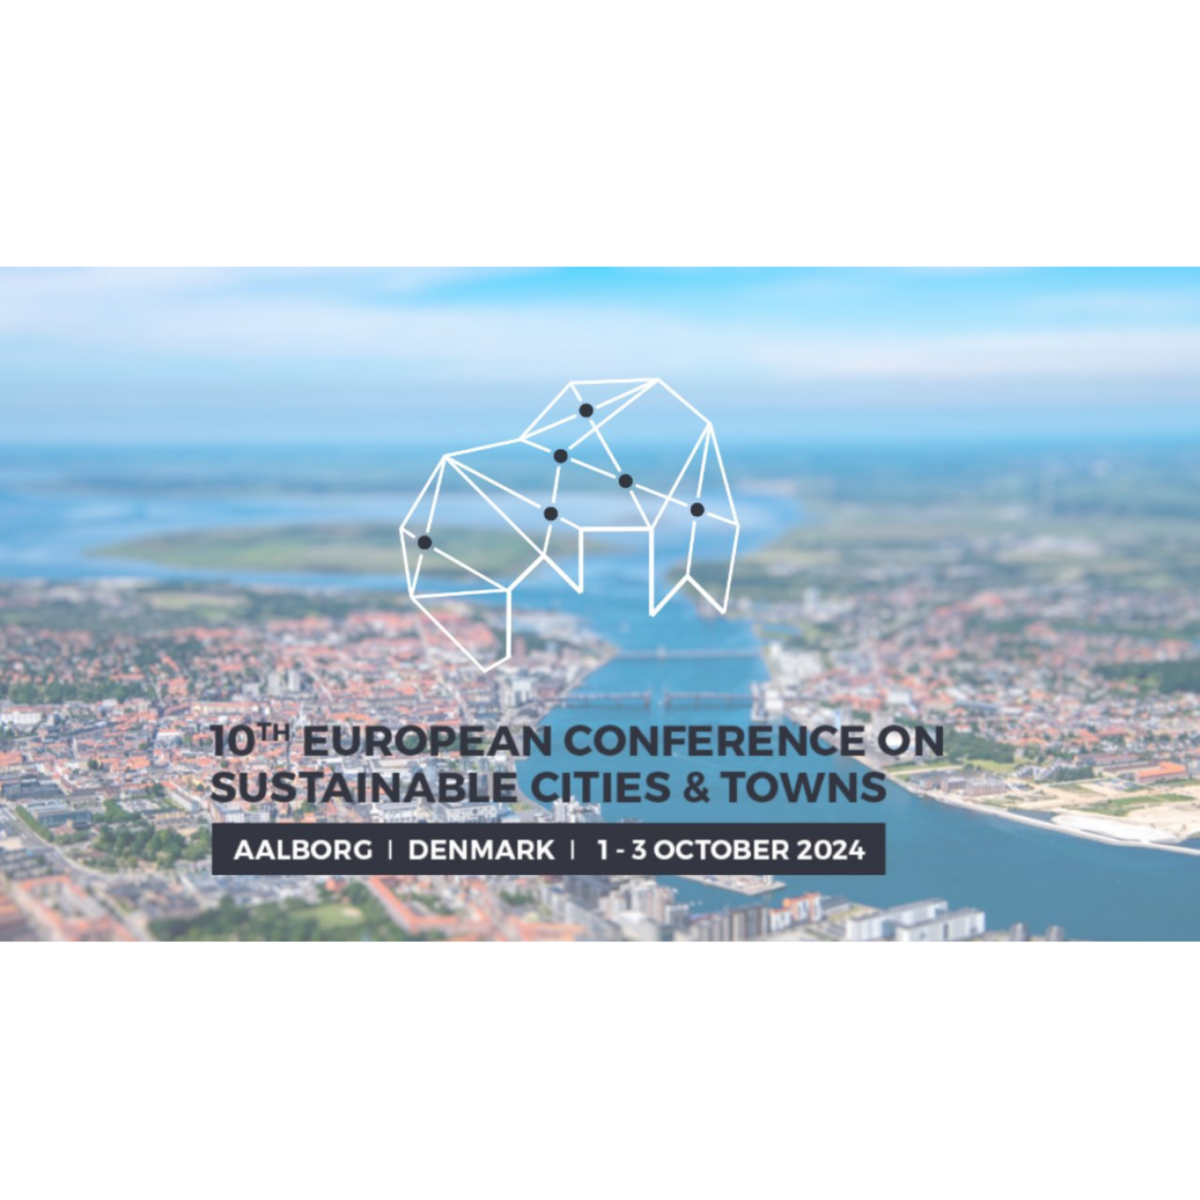 10th European Conference on Sustainable Cities & Towns